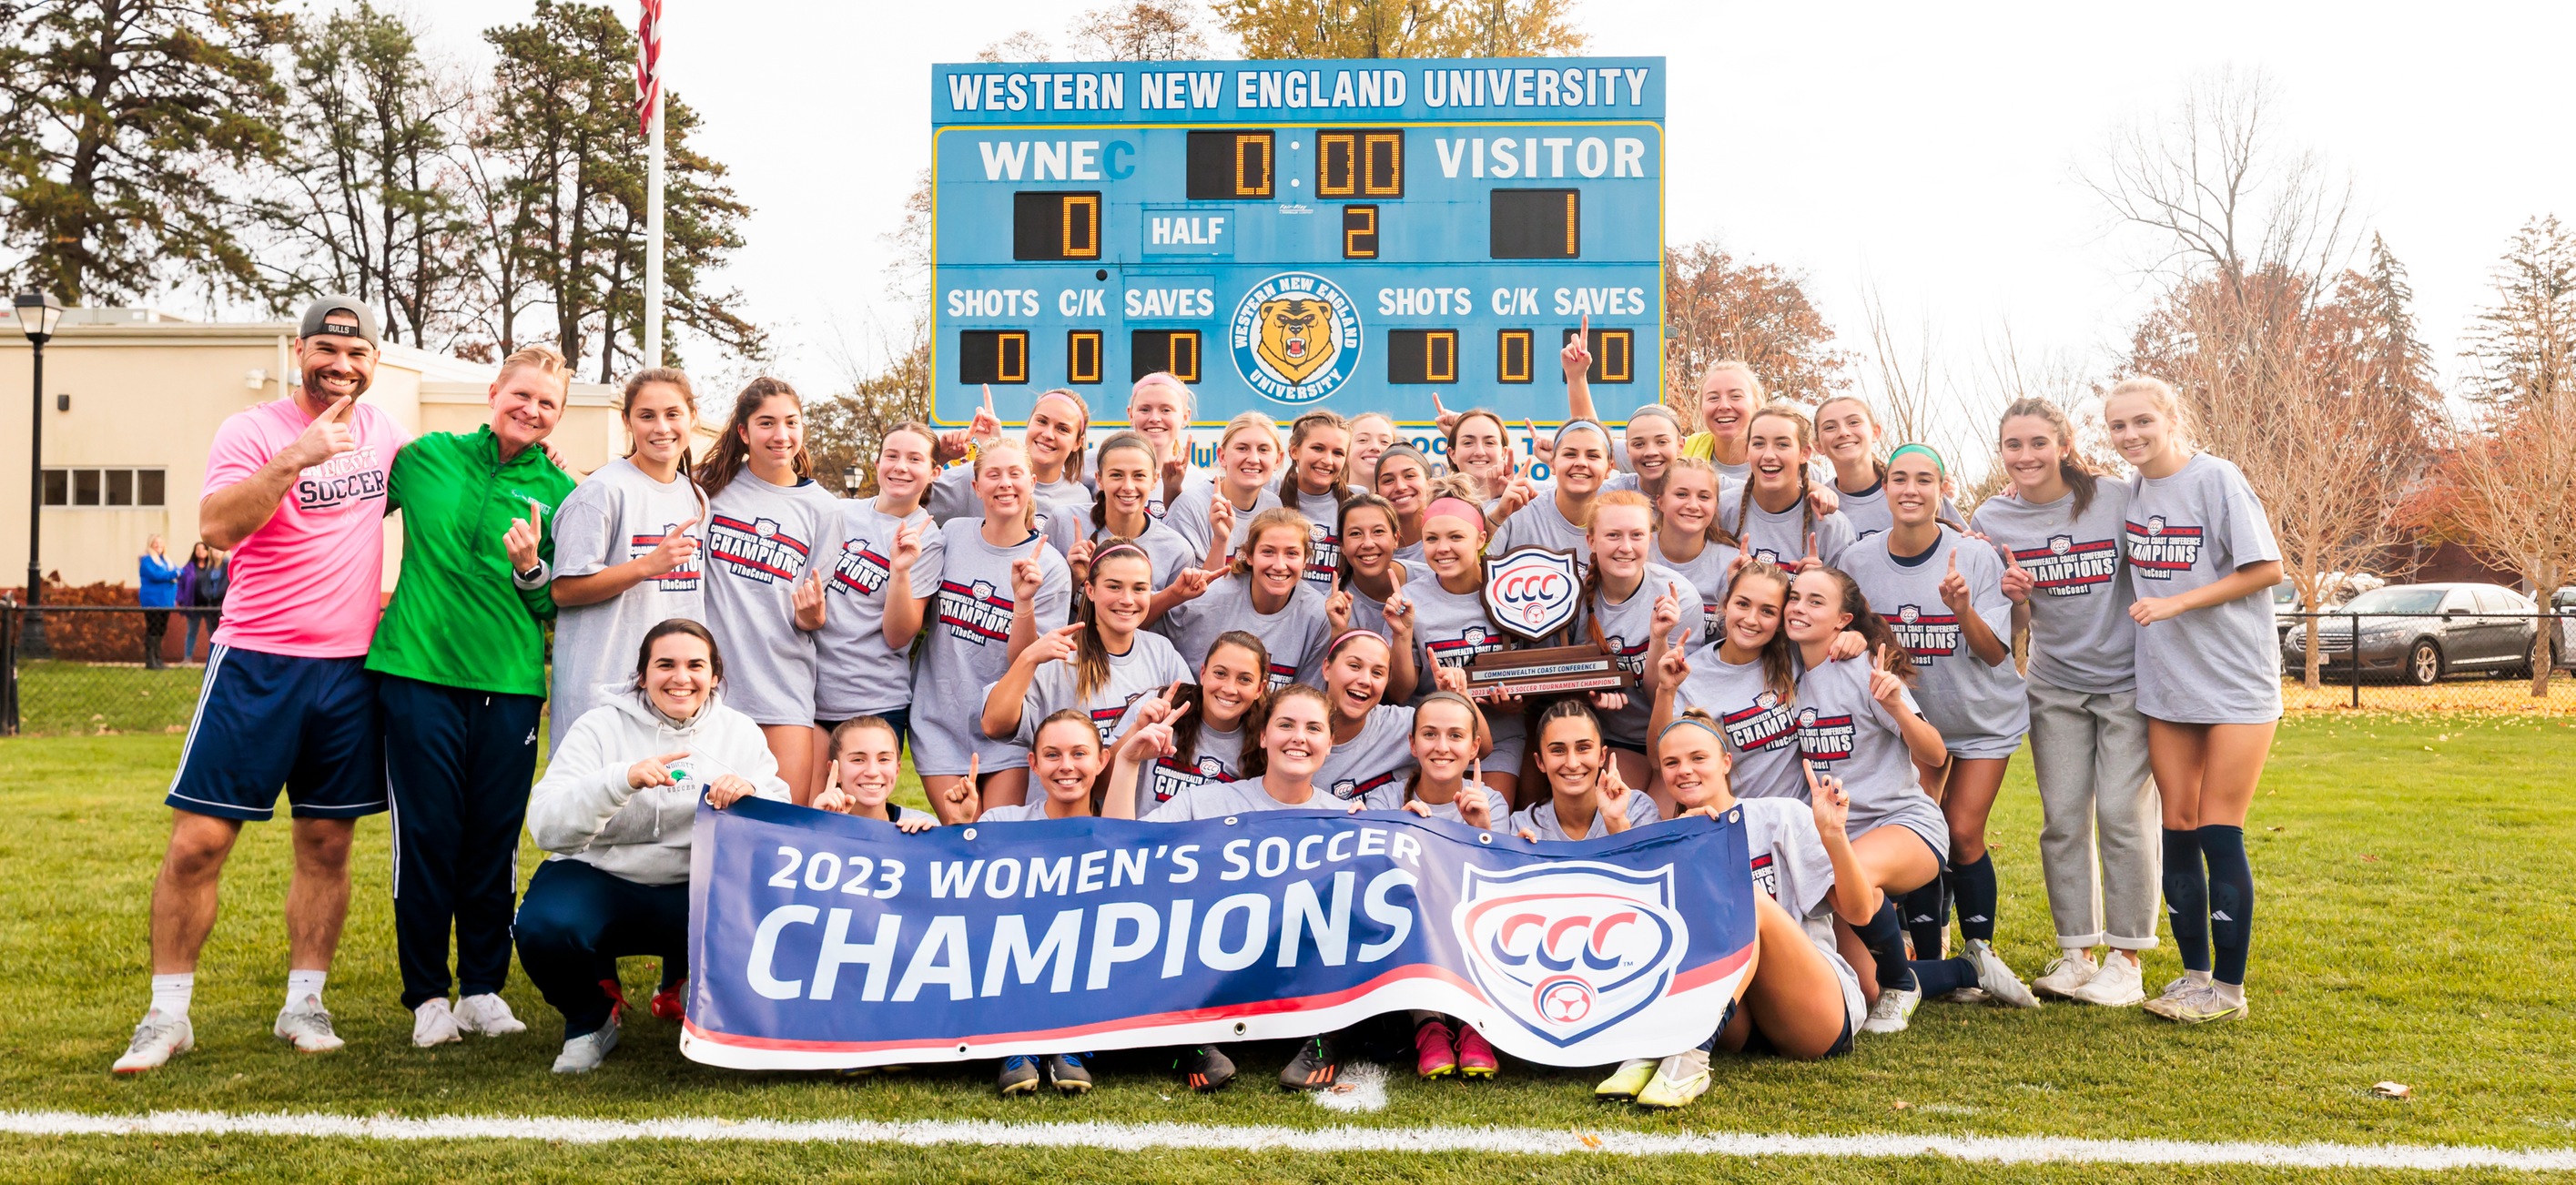 CCC CHAMPIONSHIP: Women's Soccer Bests Western New England, 1-0